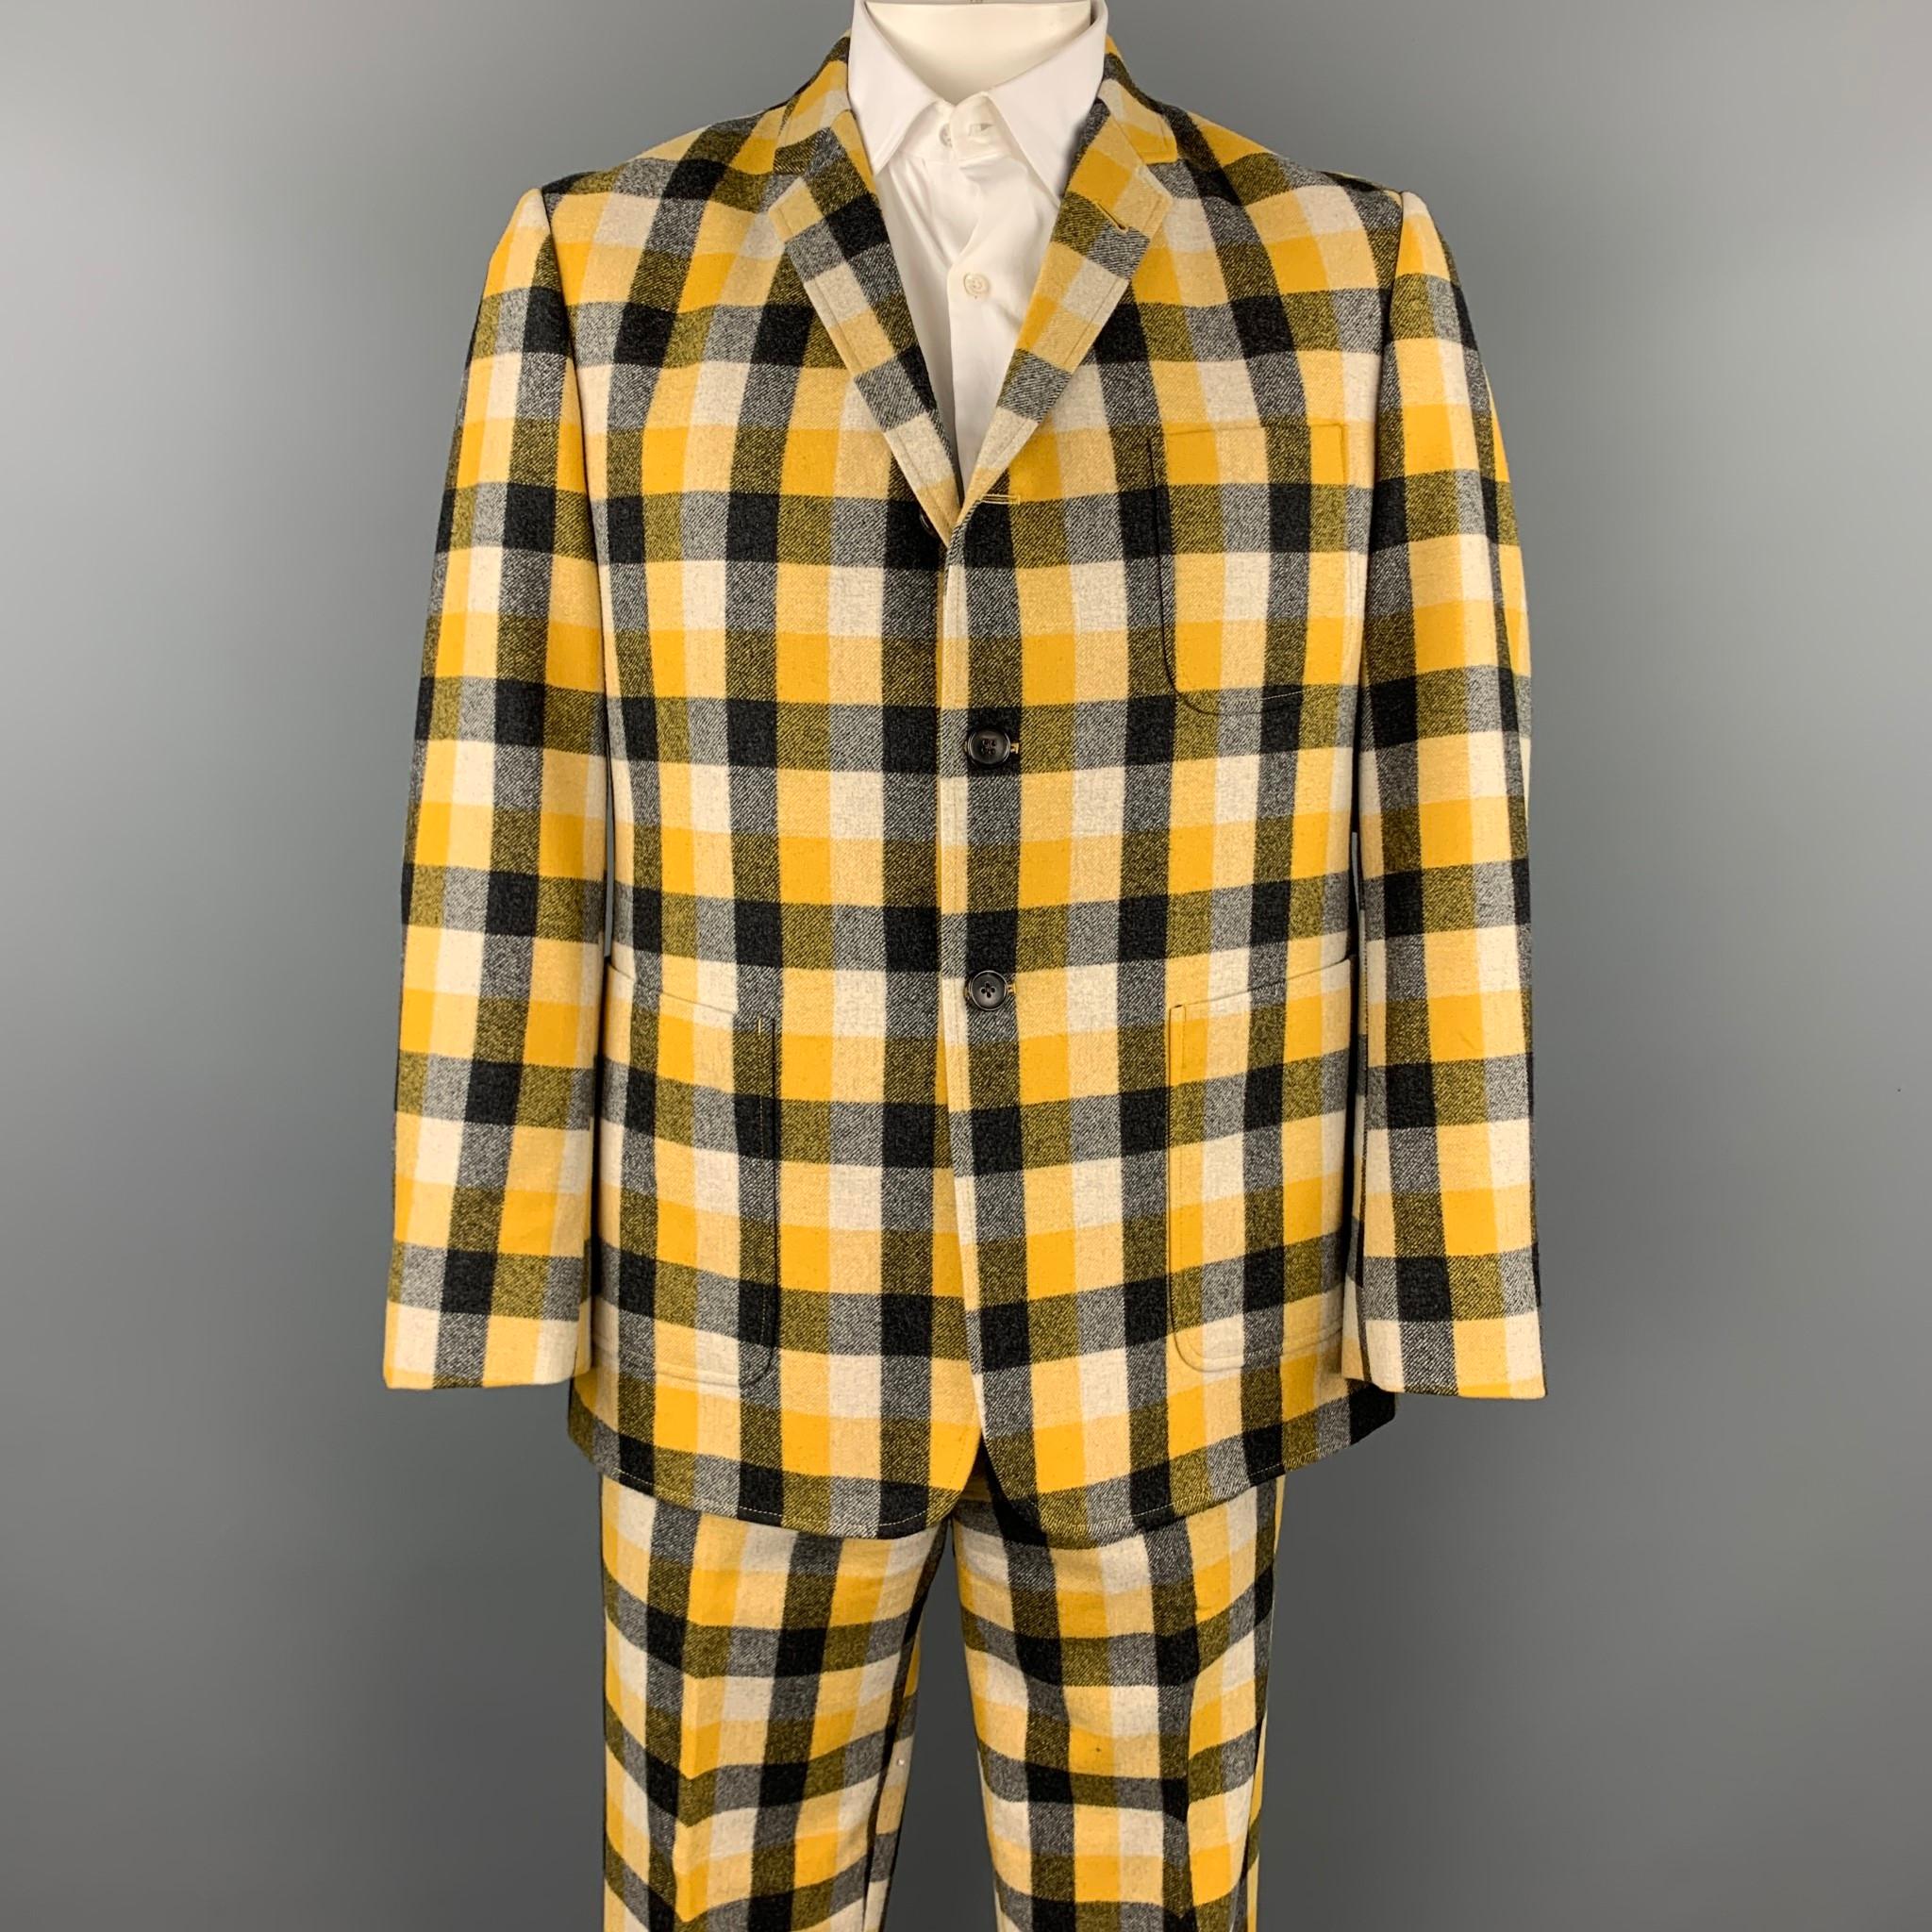 BLACK FLEECE suit comes in a yellow & grey plaid wool with a half liner and includes a single breasted, three button sport coat with a notch lapel and matching flat front trousers.

Very Good Pre-Owned Condition.
Marked: